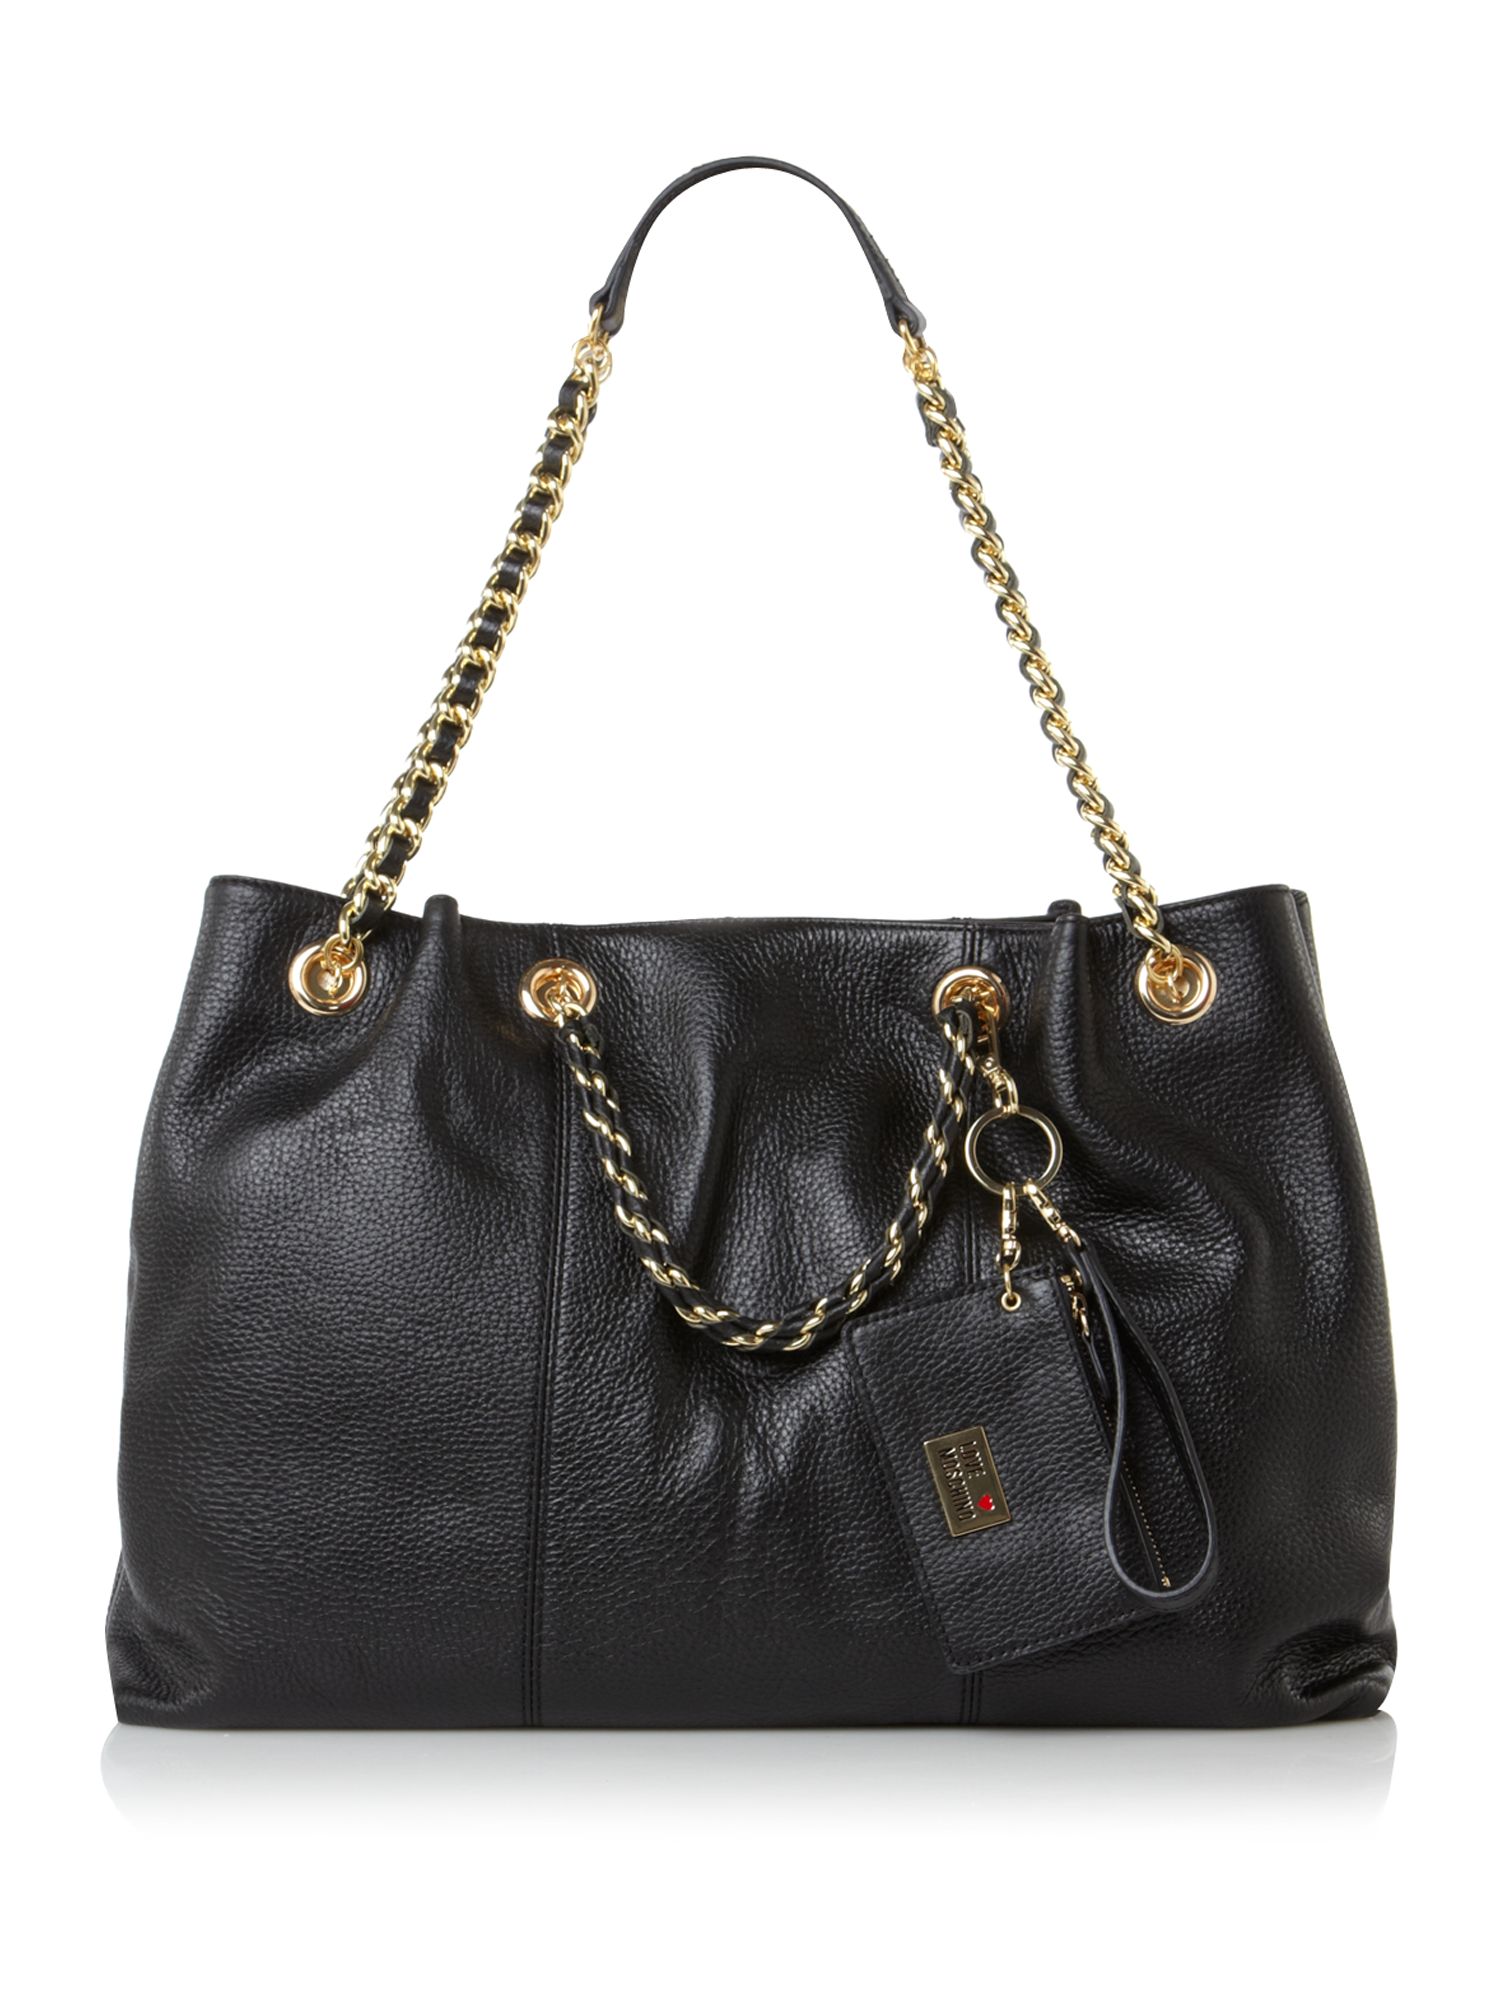 Love Moschino Chain Tote Bag in Black | Lyst